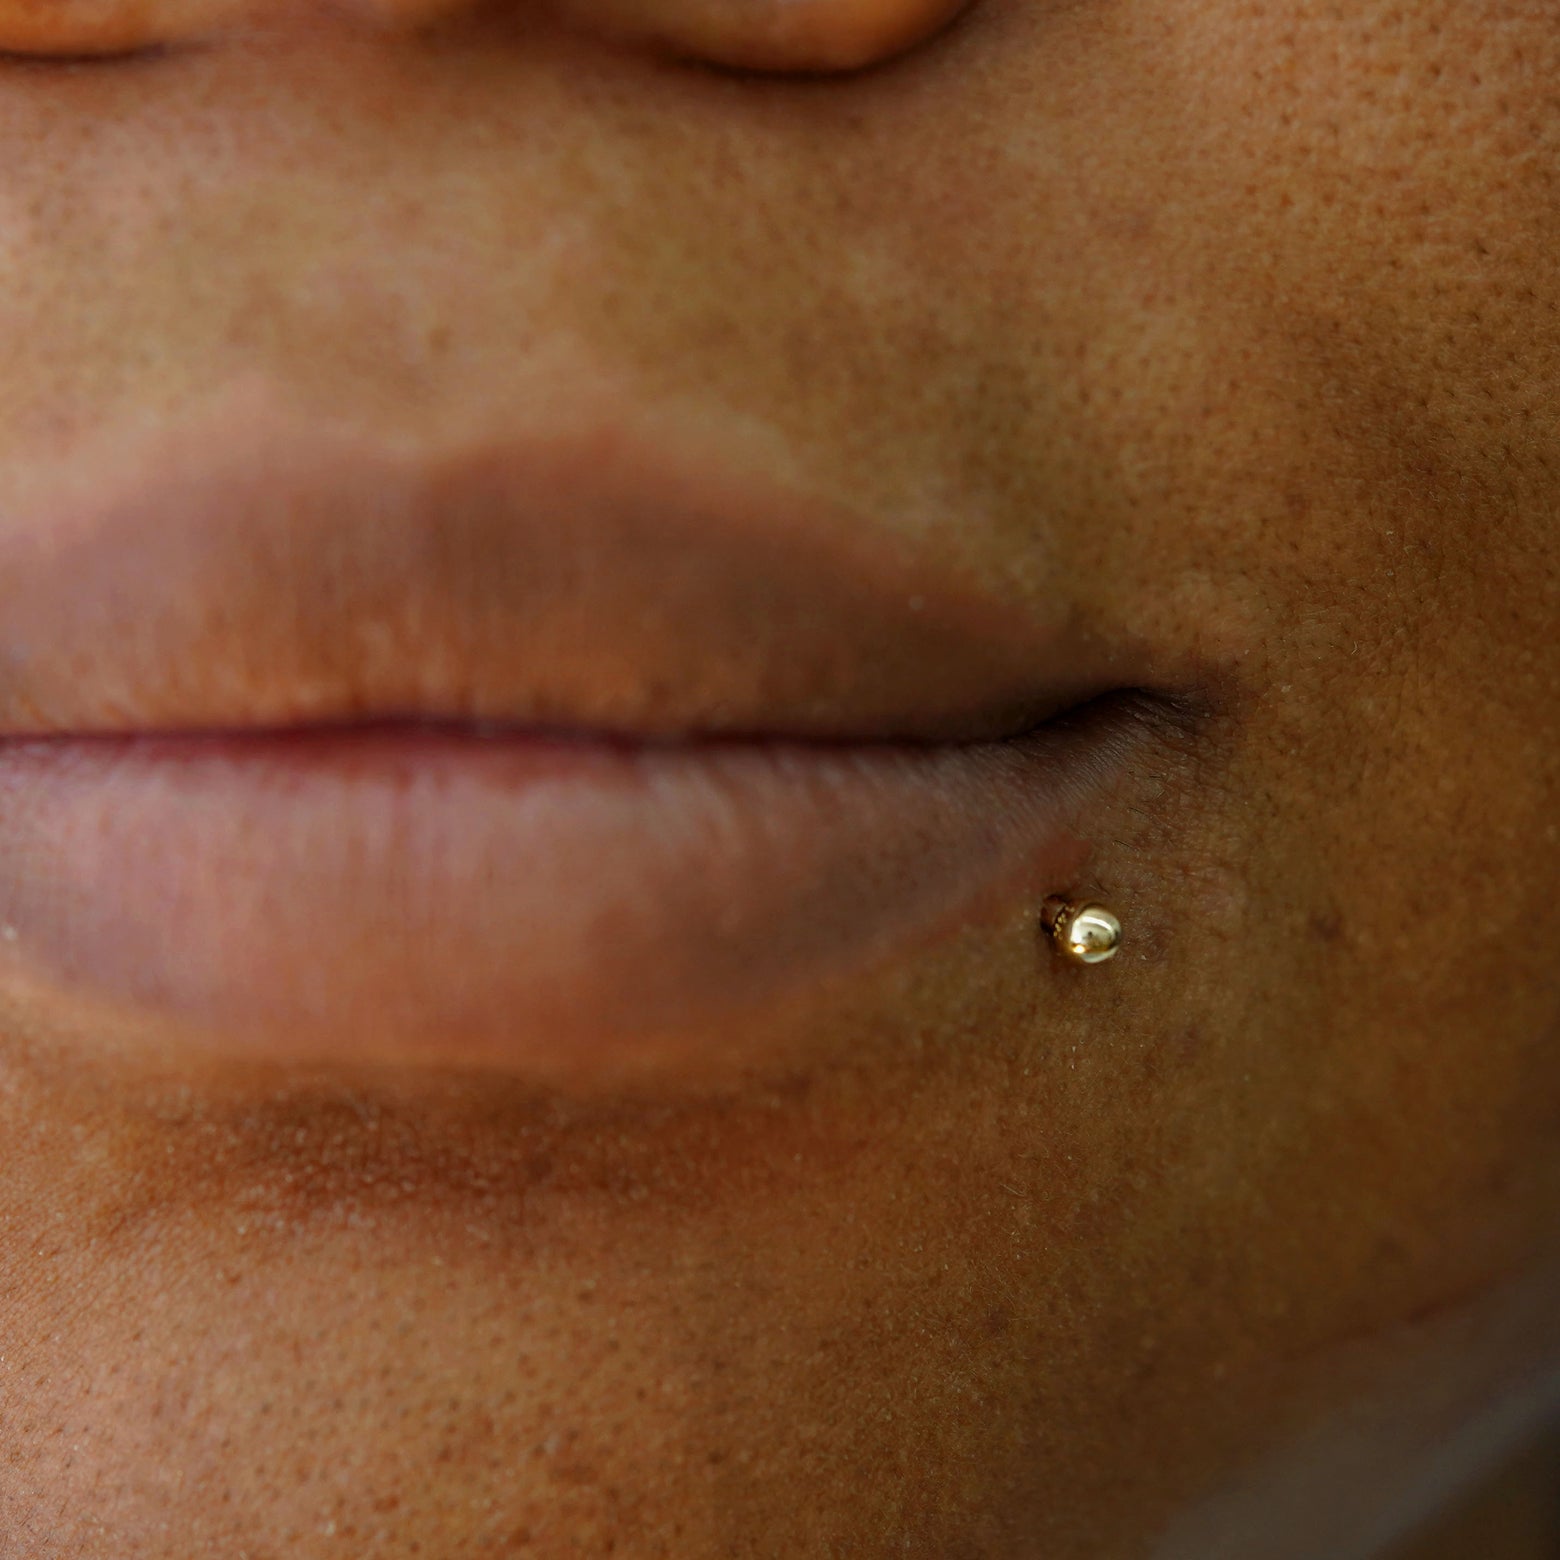 A model wearing a 14 karat gold Small Labret Piercing under the left side of their lip